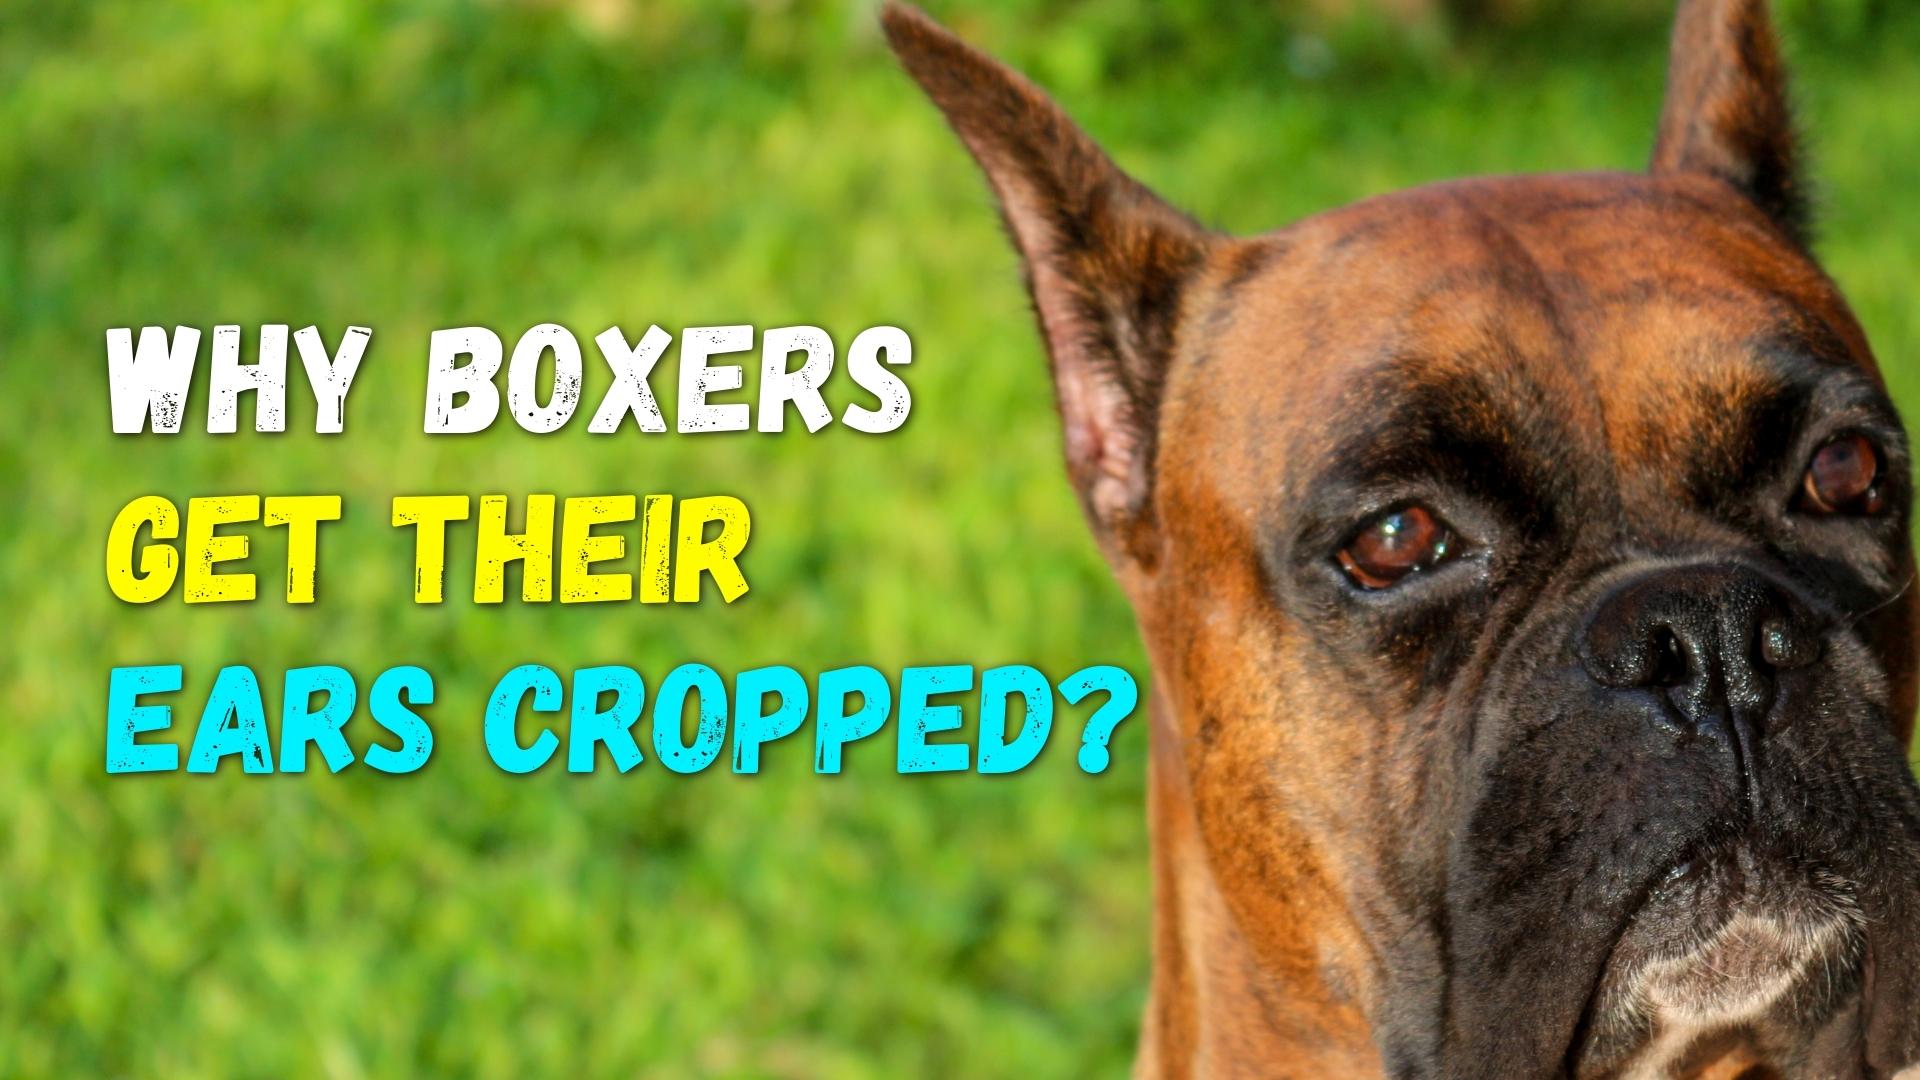 Boxer Dog Ears: Why Do Boxers Get Their Ears Cropped?